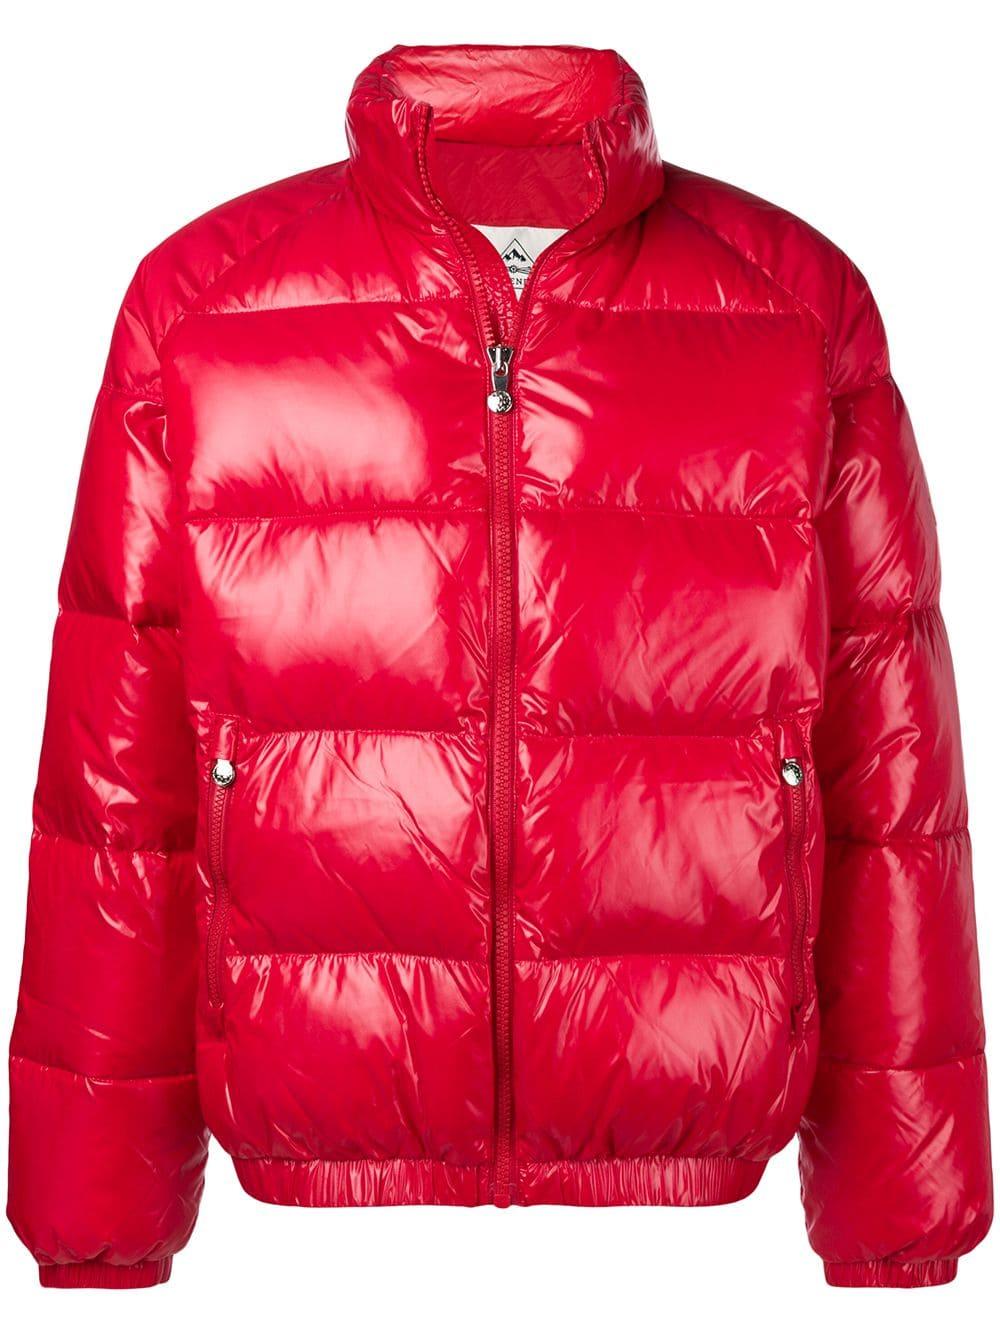 Pyrenex Puffer Coat in Red for Men - Lyst